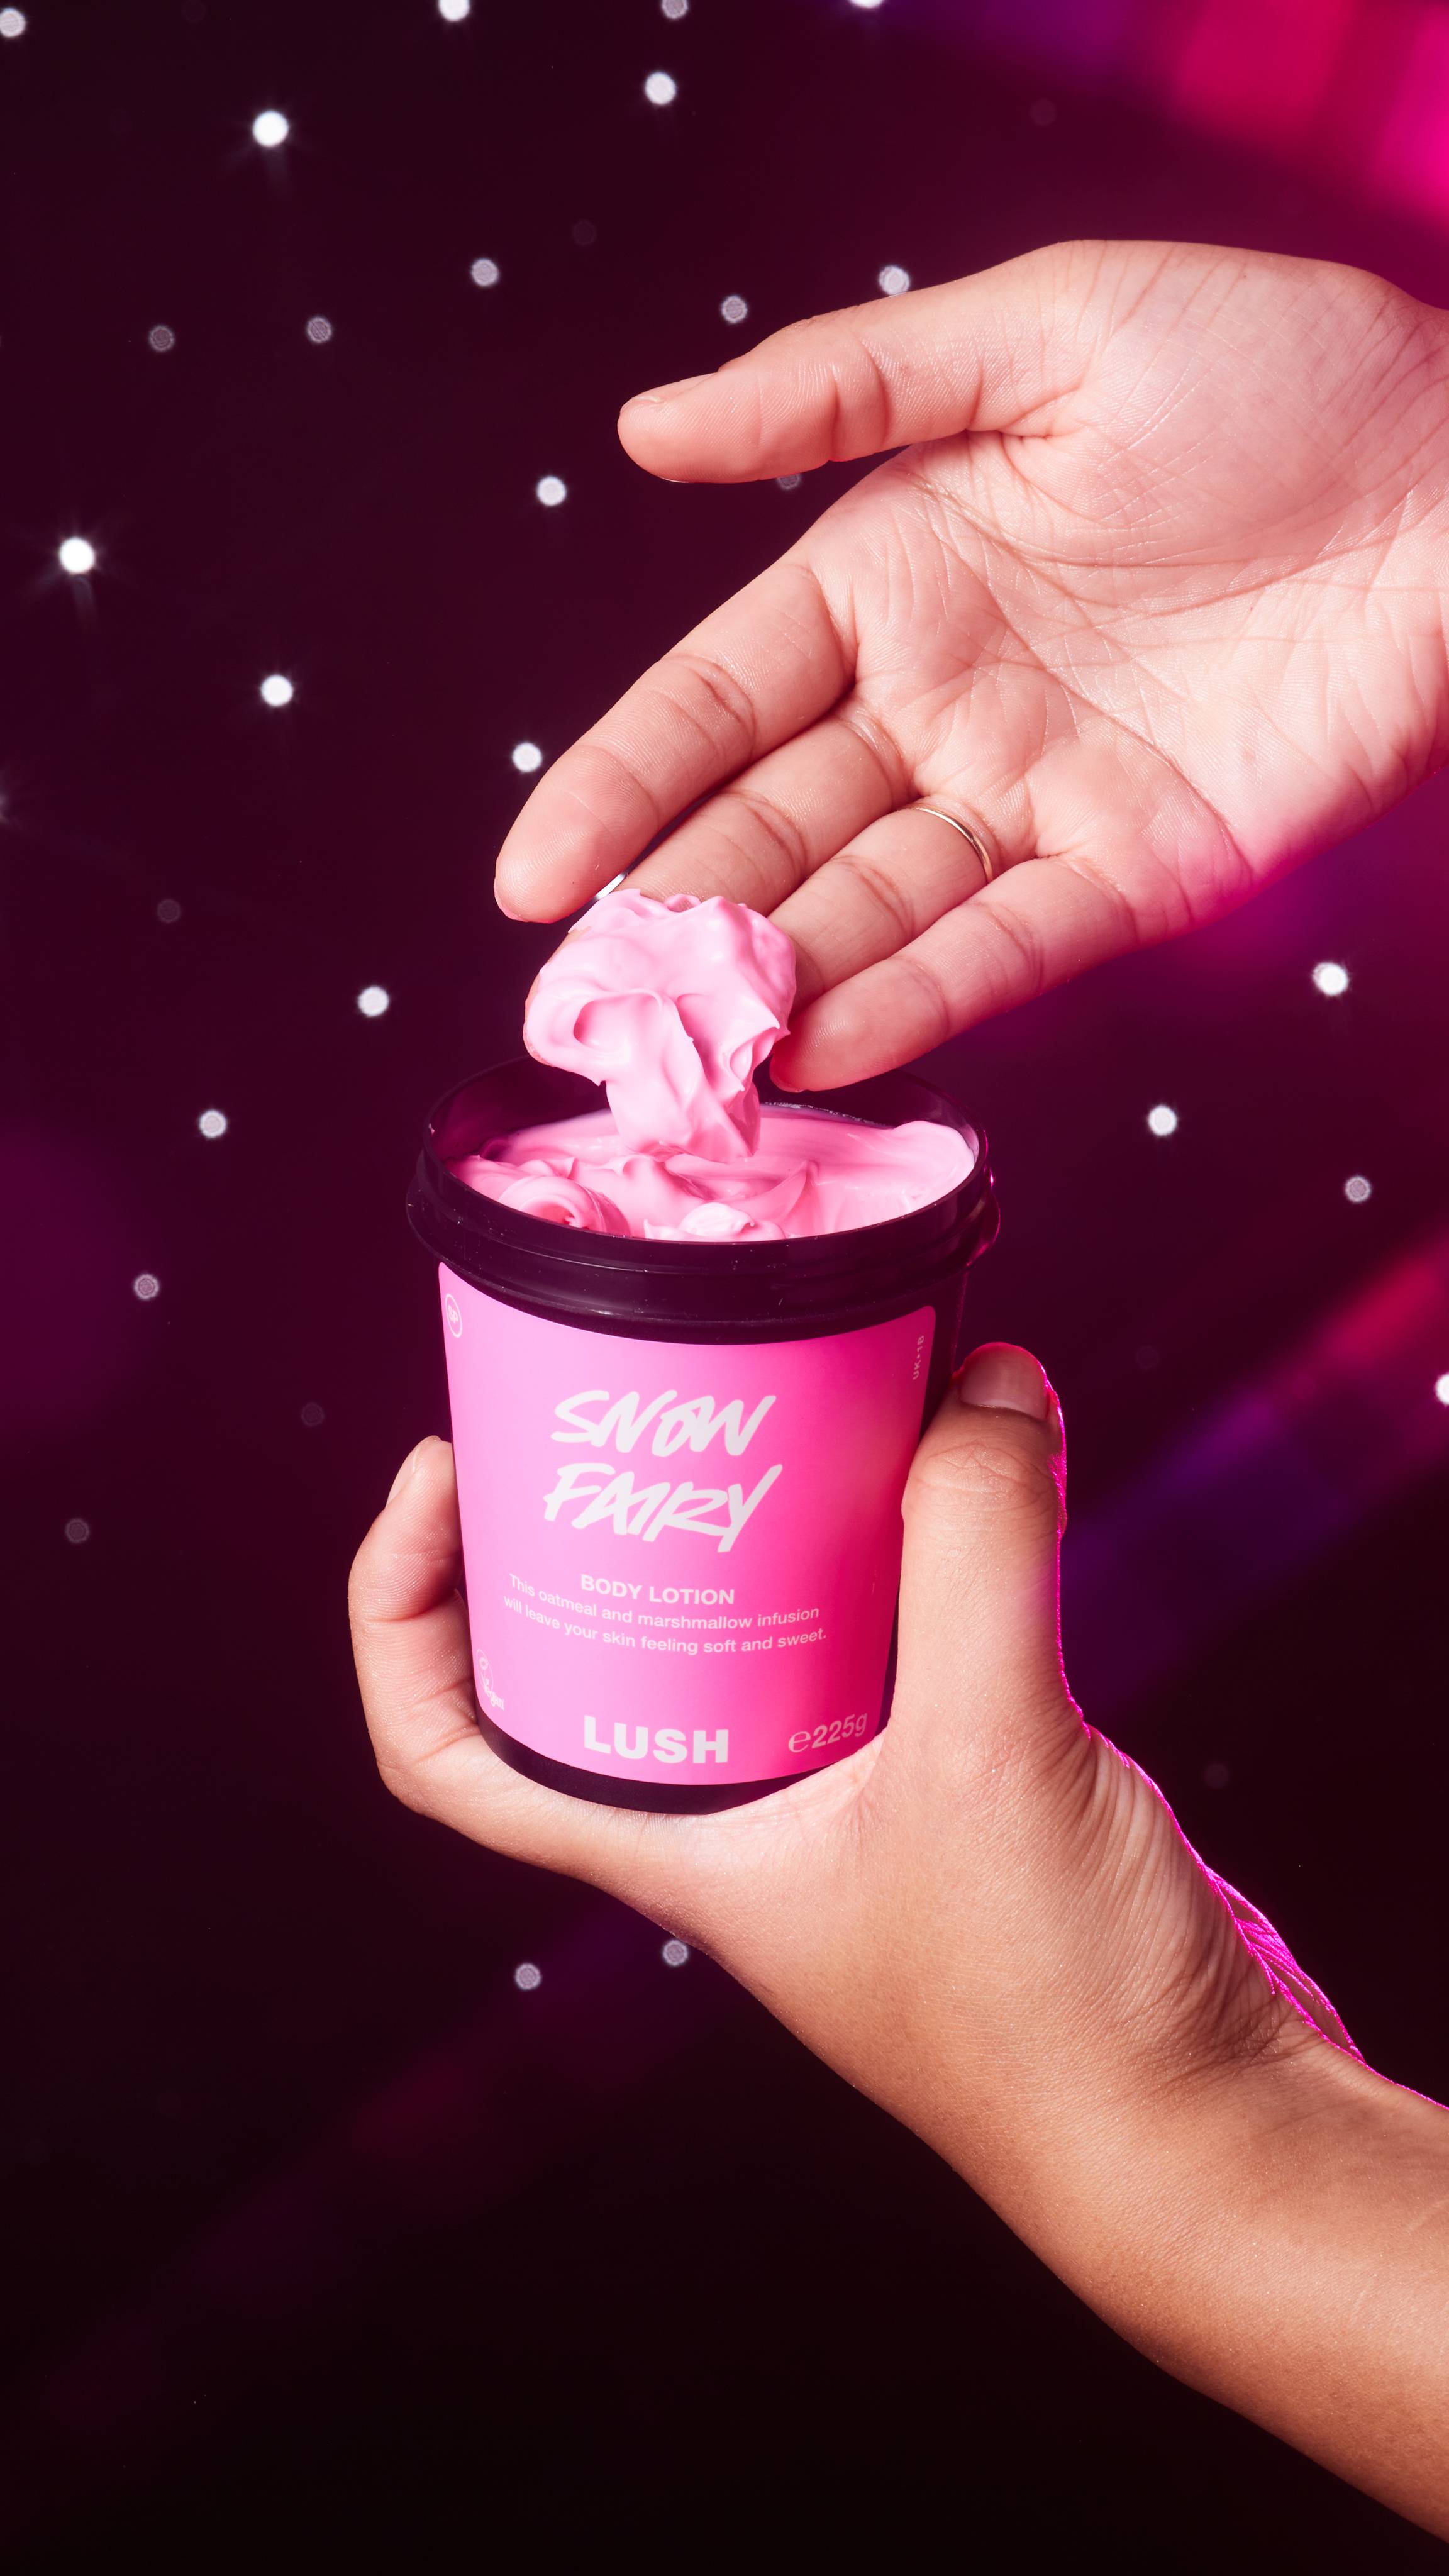 A close-up of the model holding the Snow Fairy body lotion pot as they gently scoop some out.